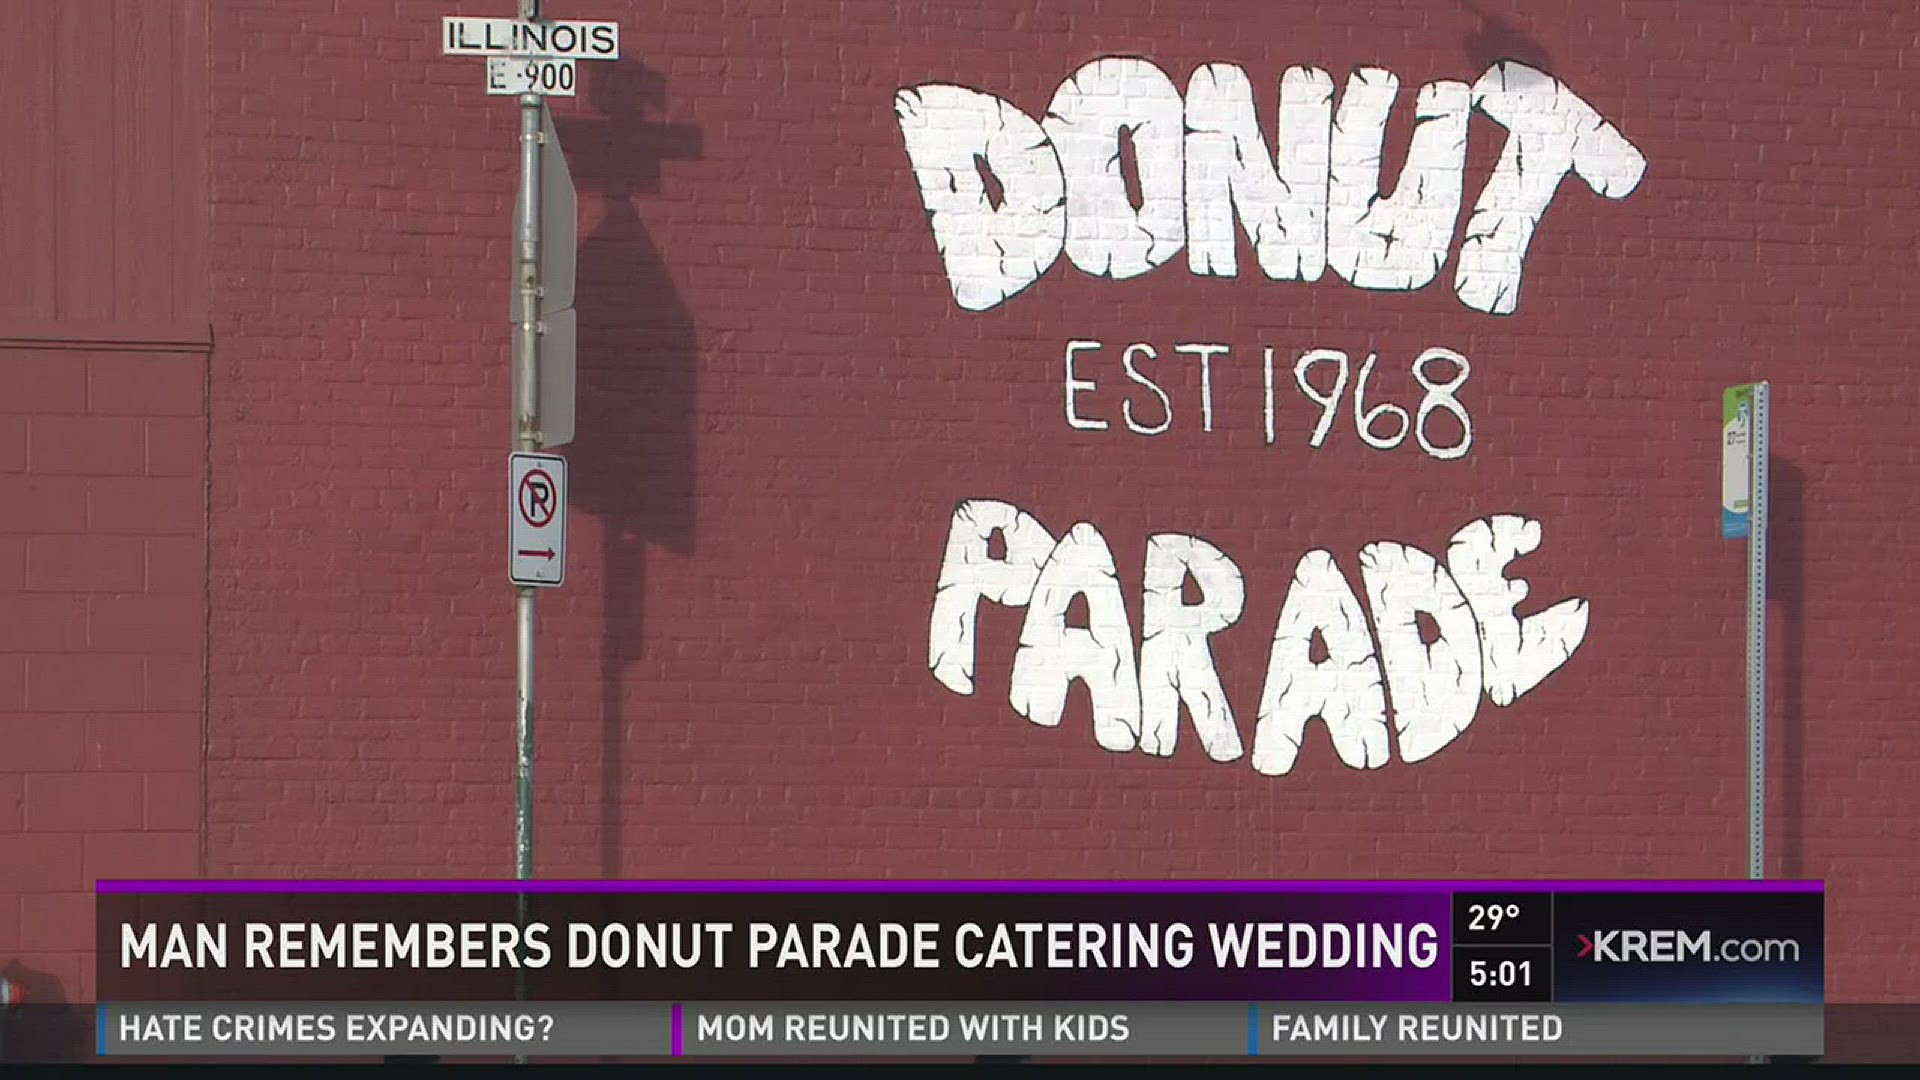 Man remembers Donut Parade catering wedding